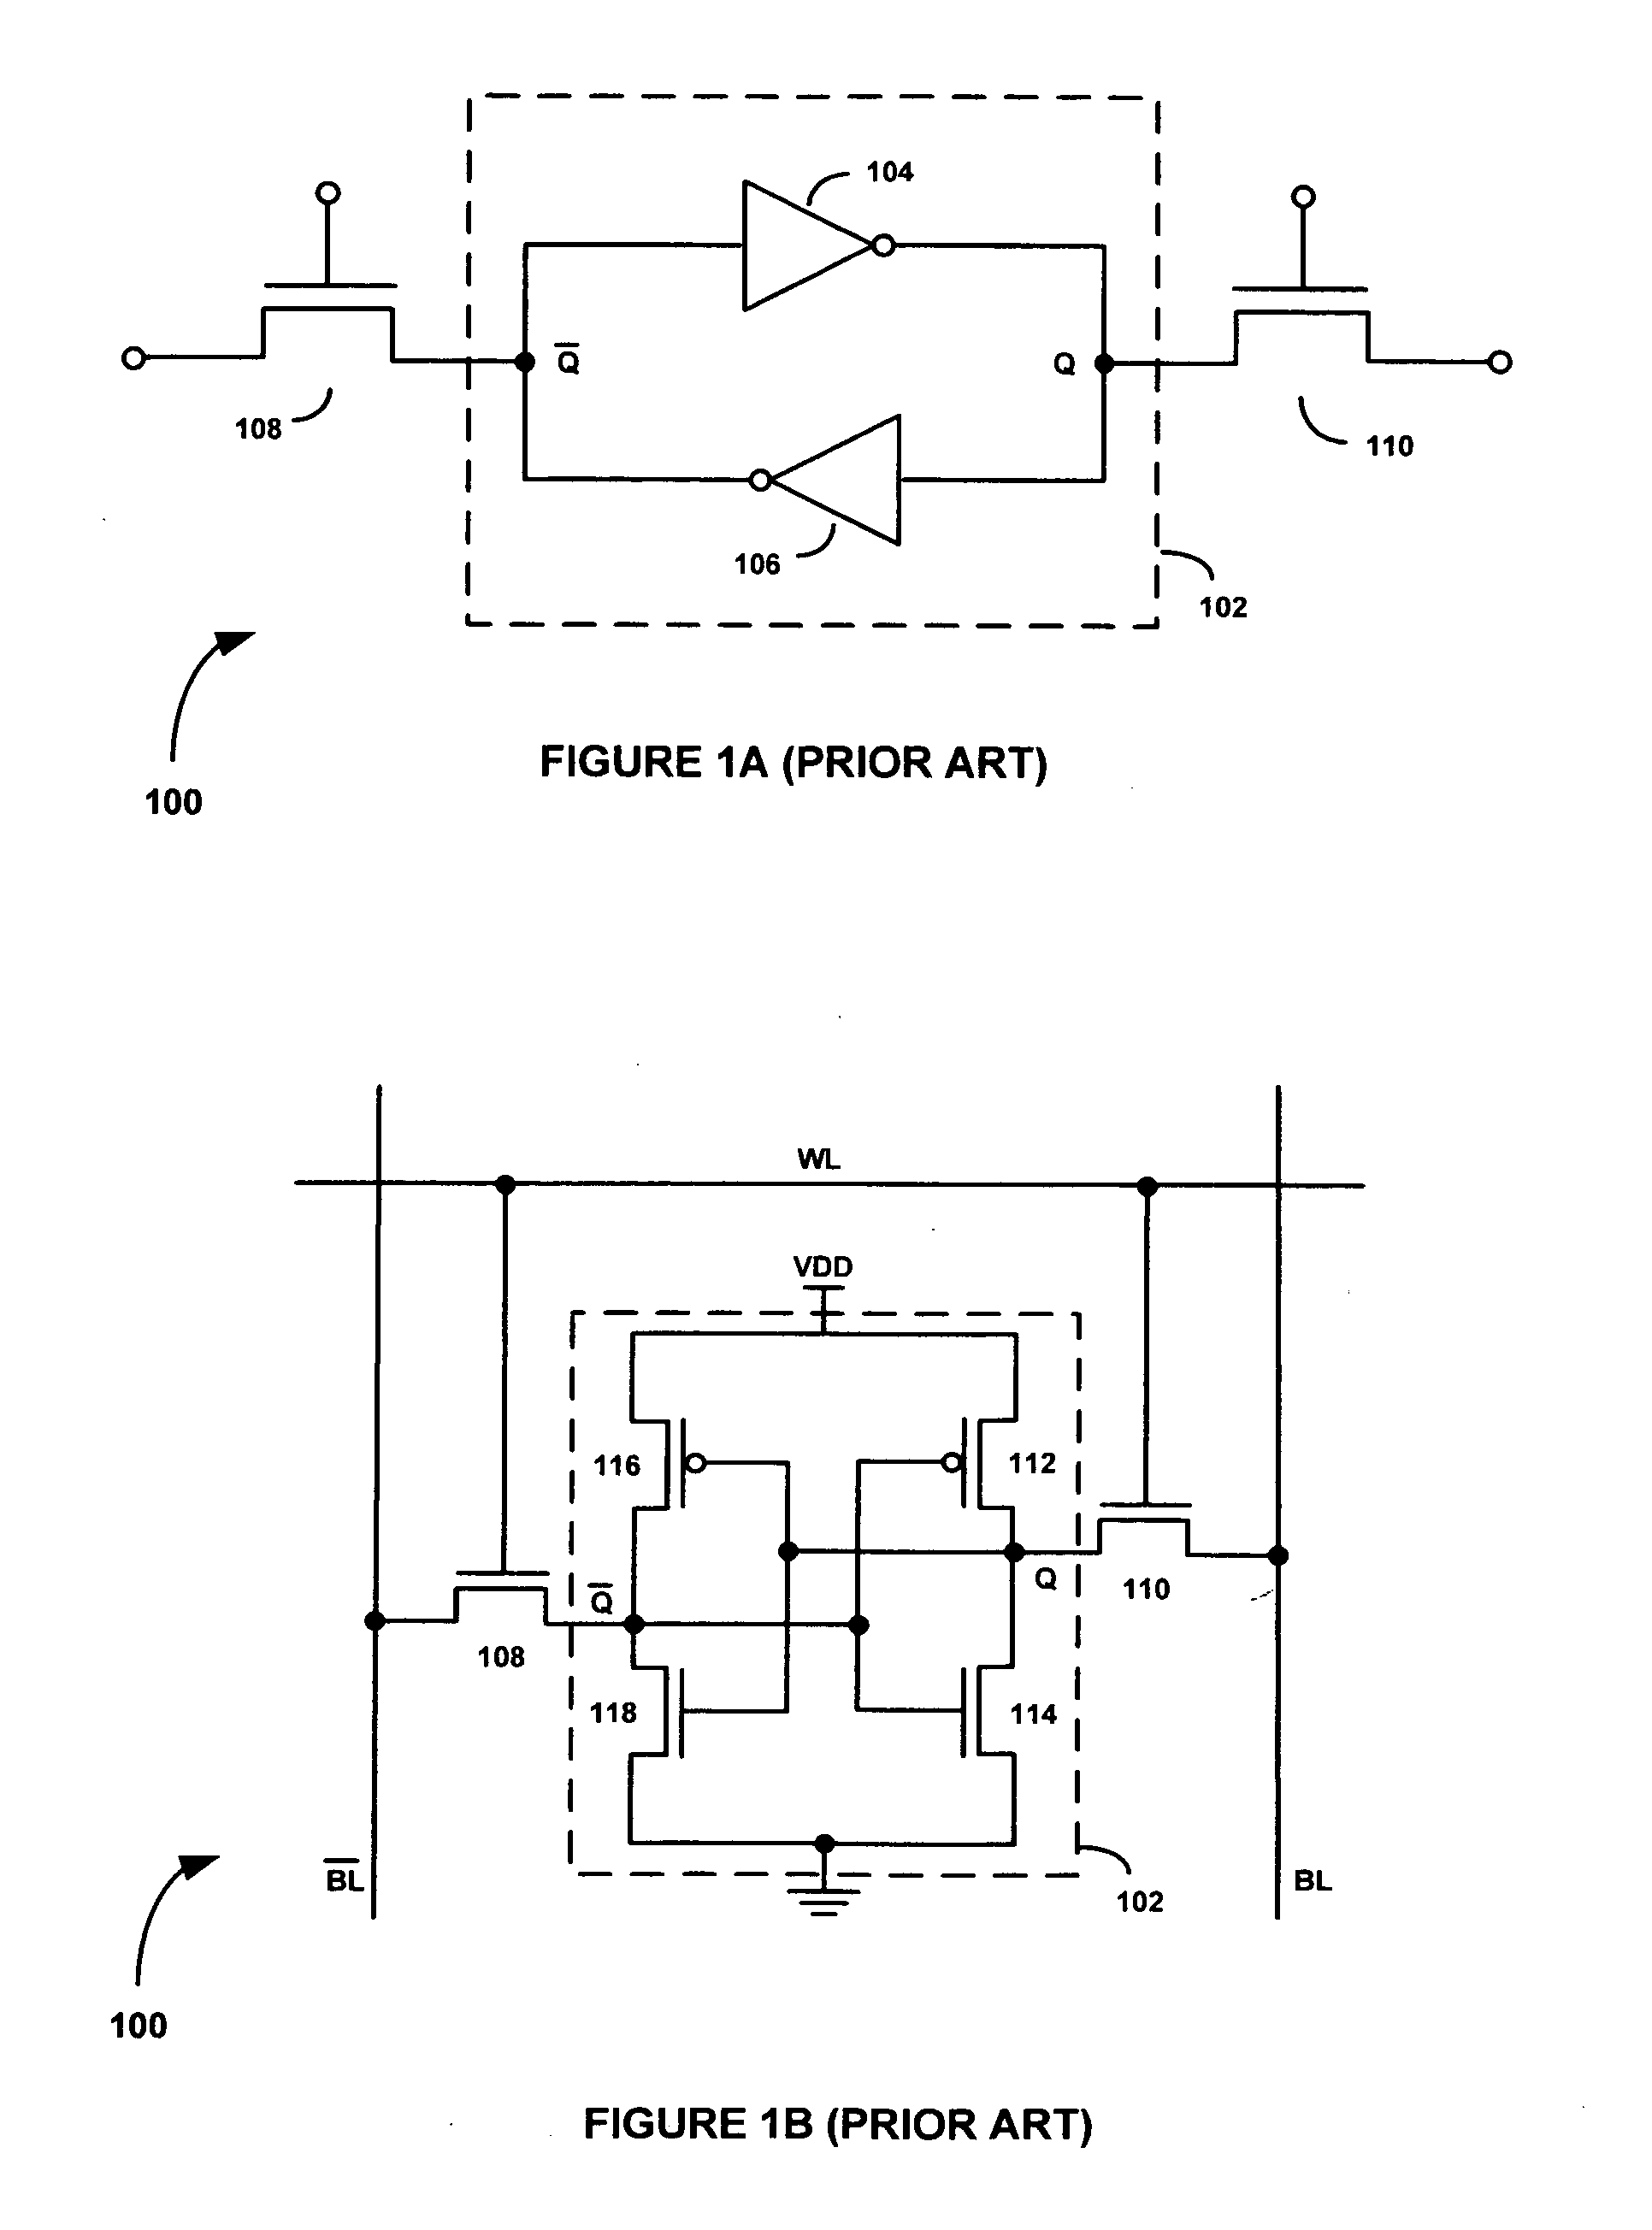 SEU hardened latches and memory cells using progrmmable resistance devices